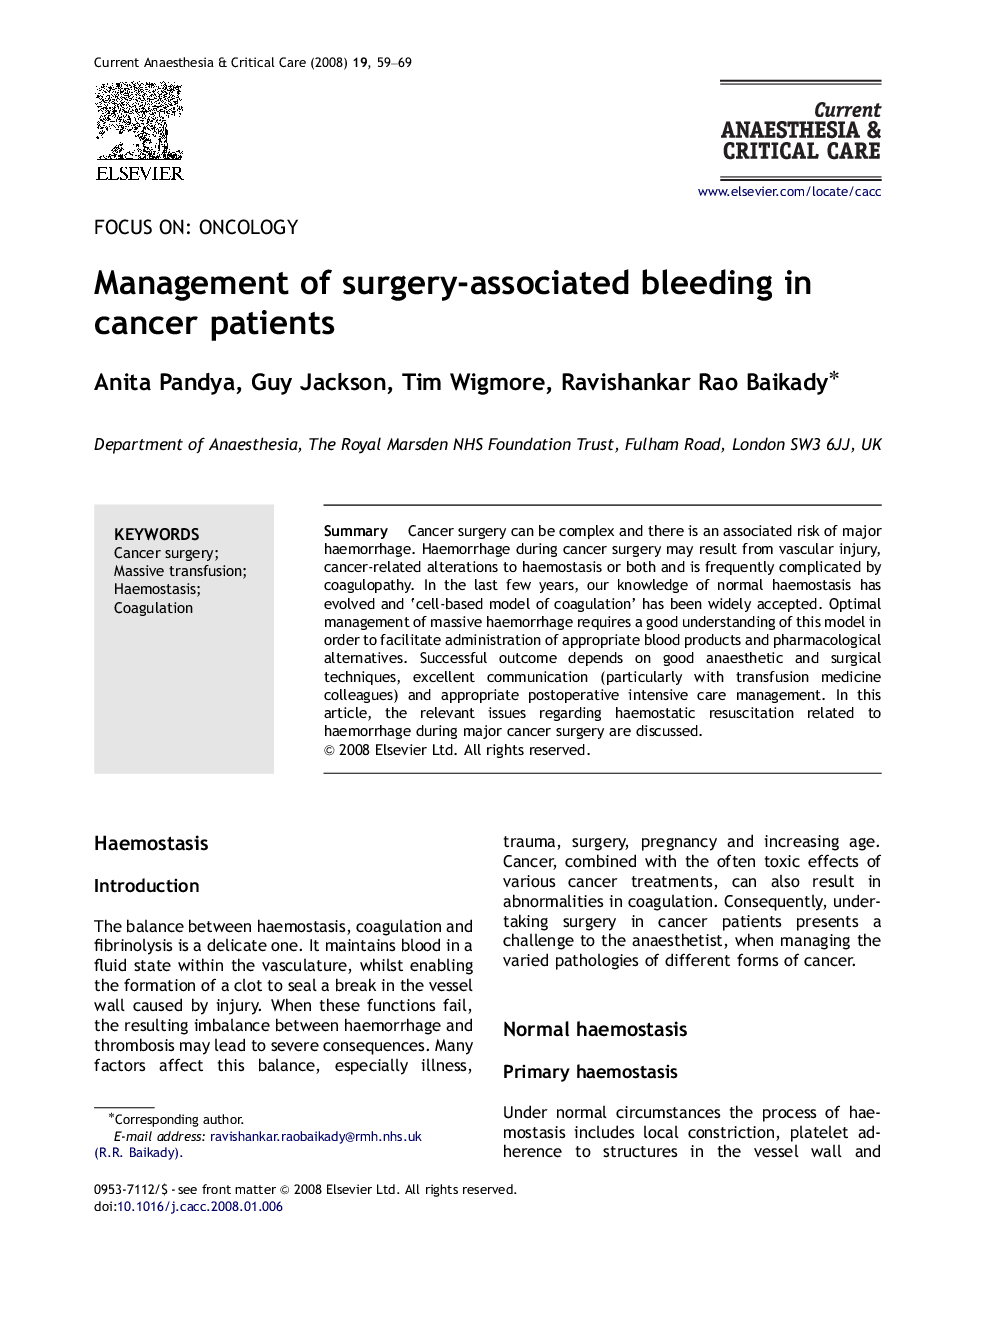 Management of surgery-associated bleeding in cancer patients